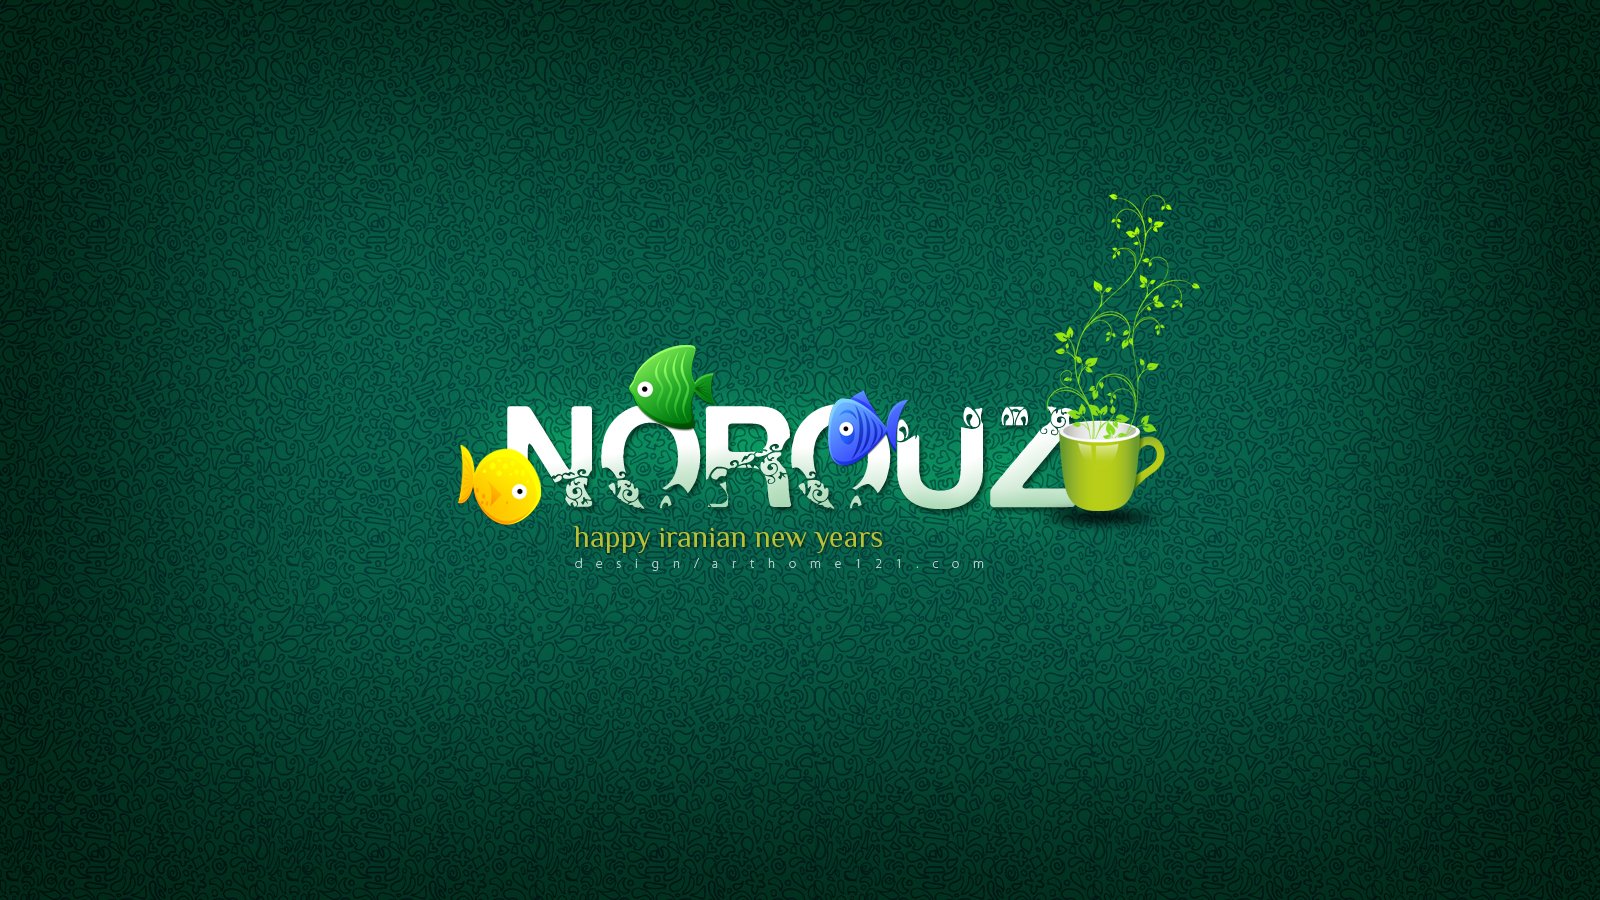 Amazing Norooz Pictures & Backgrounds